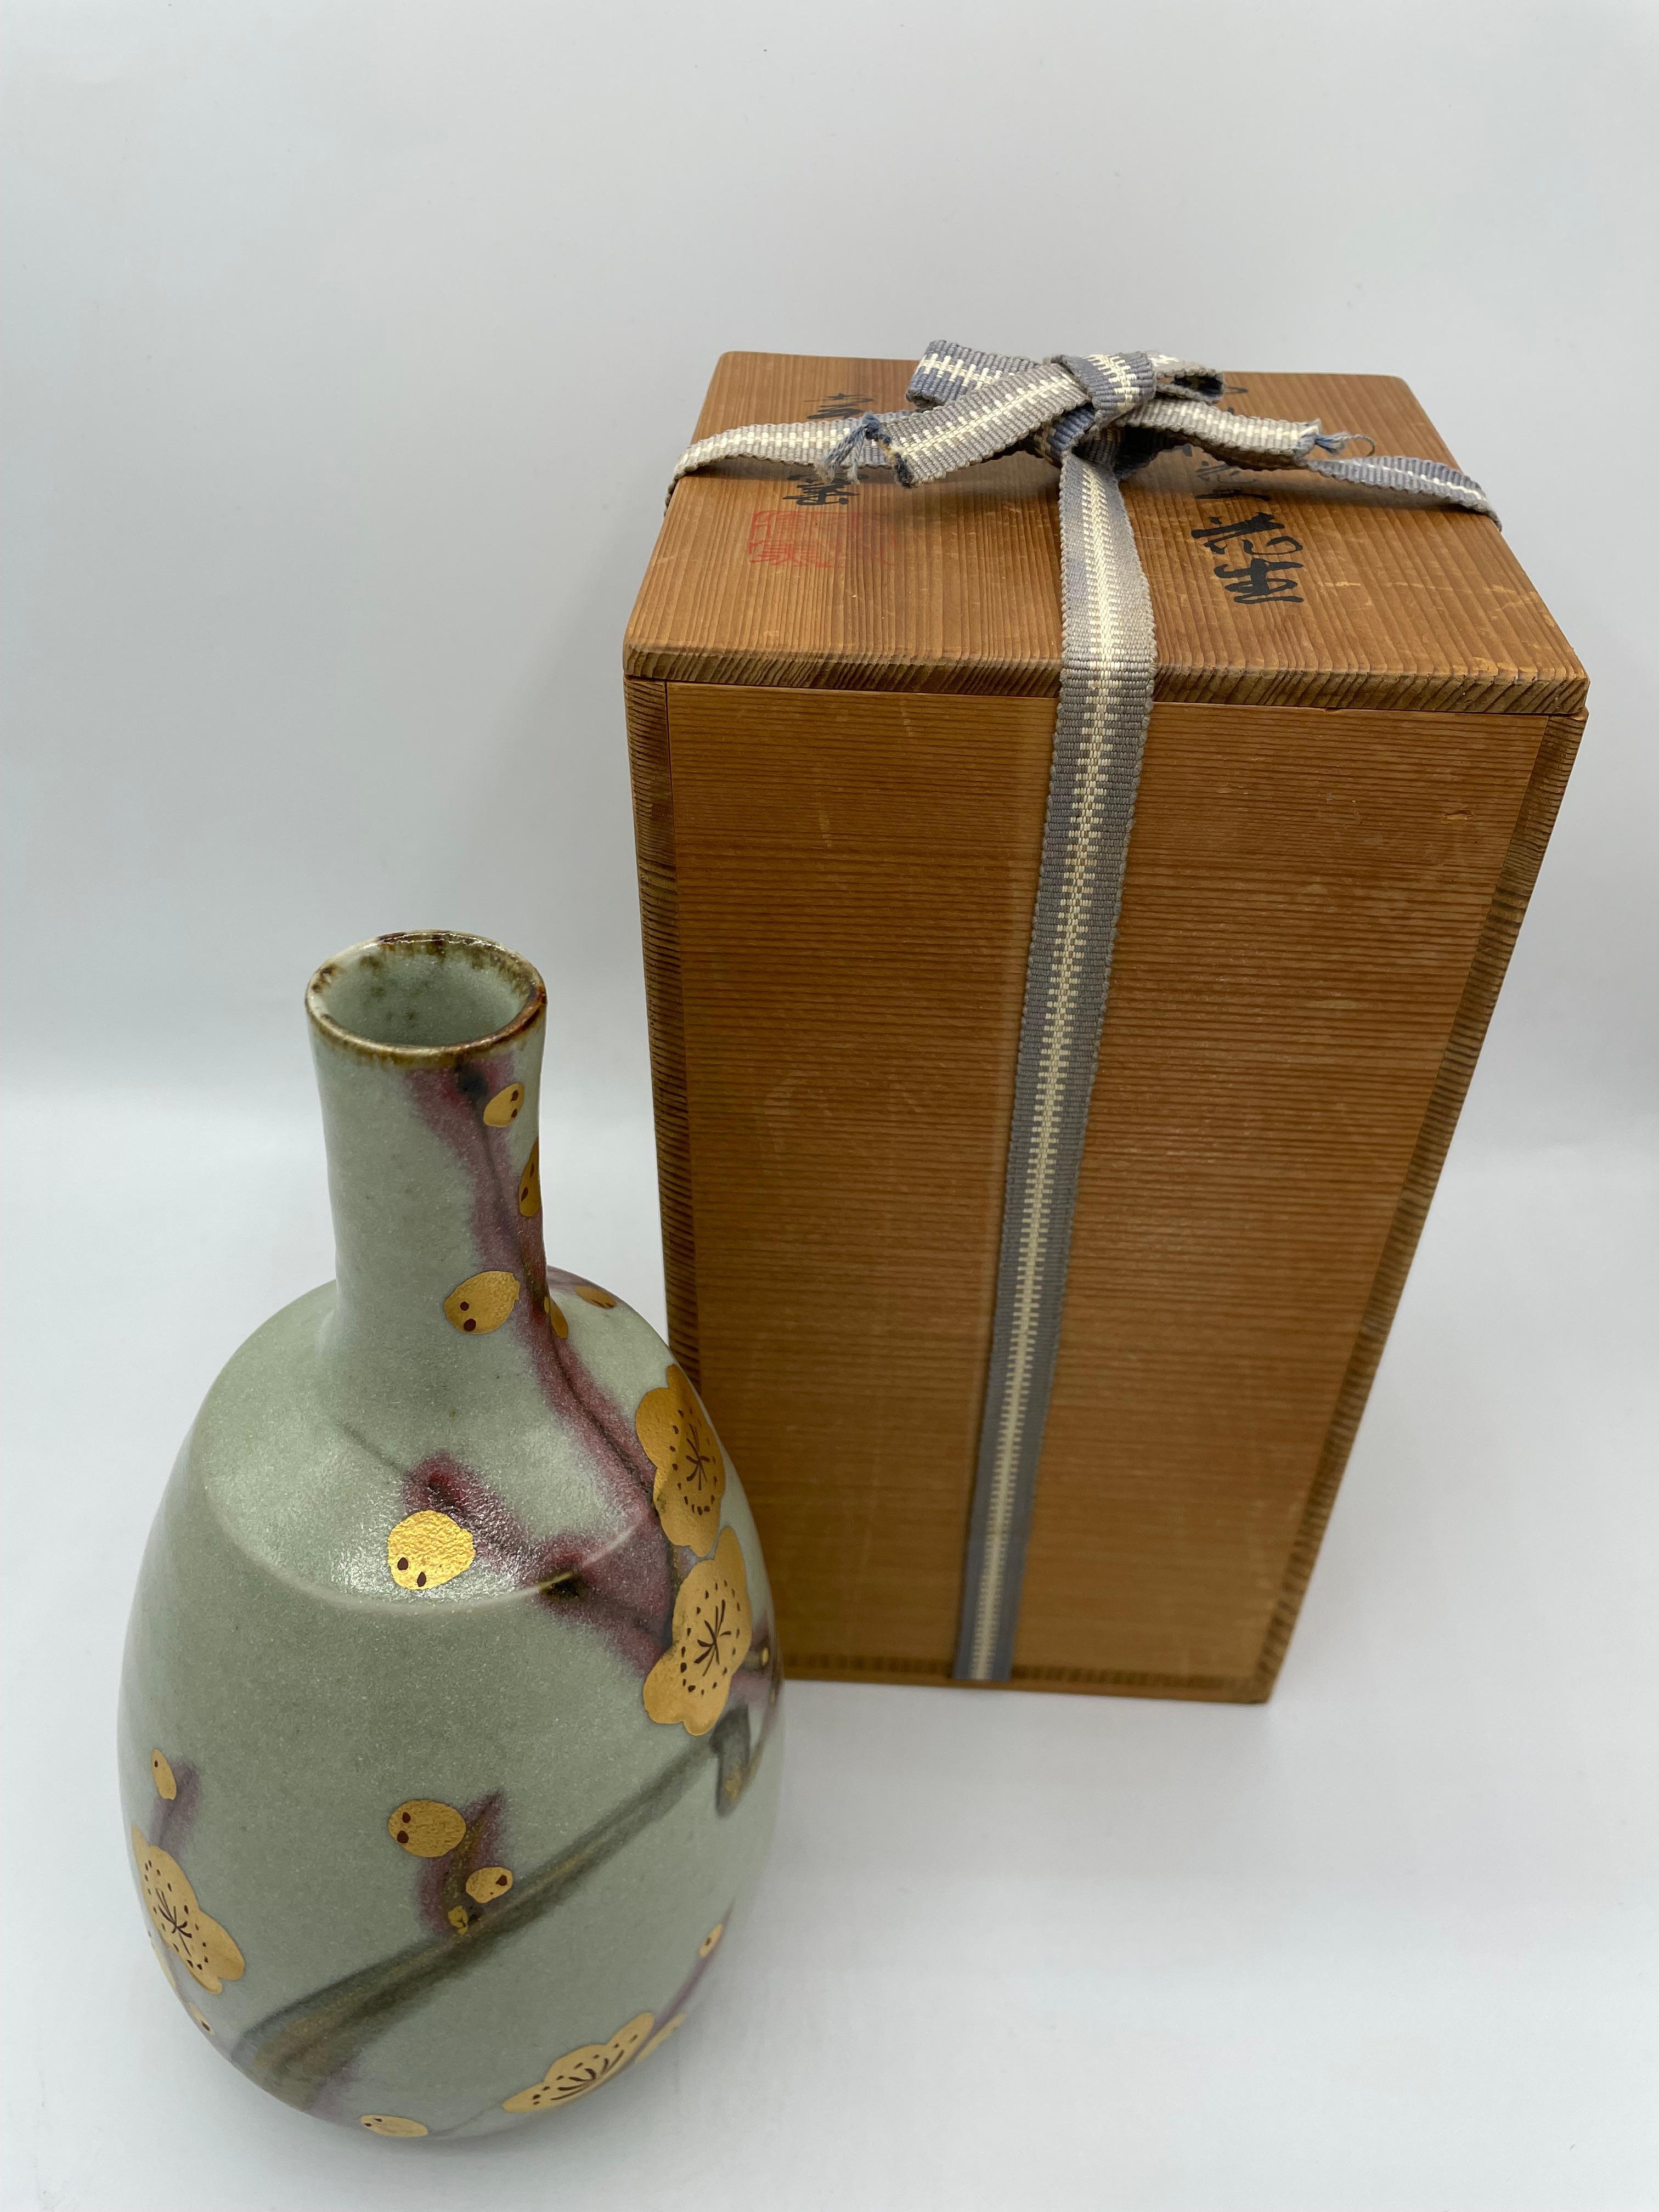 Japanese Flower Vase Plum 1970s  with Wooden Box For Sale 5